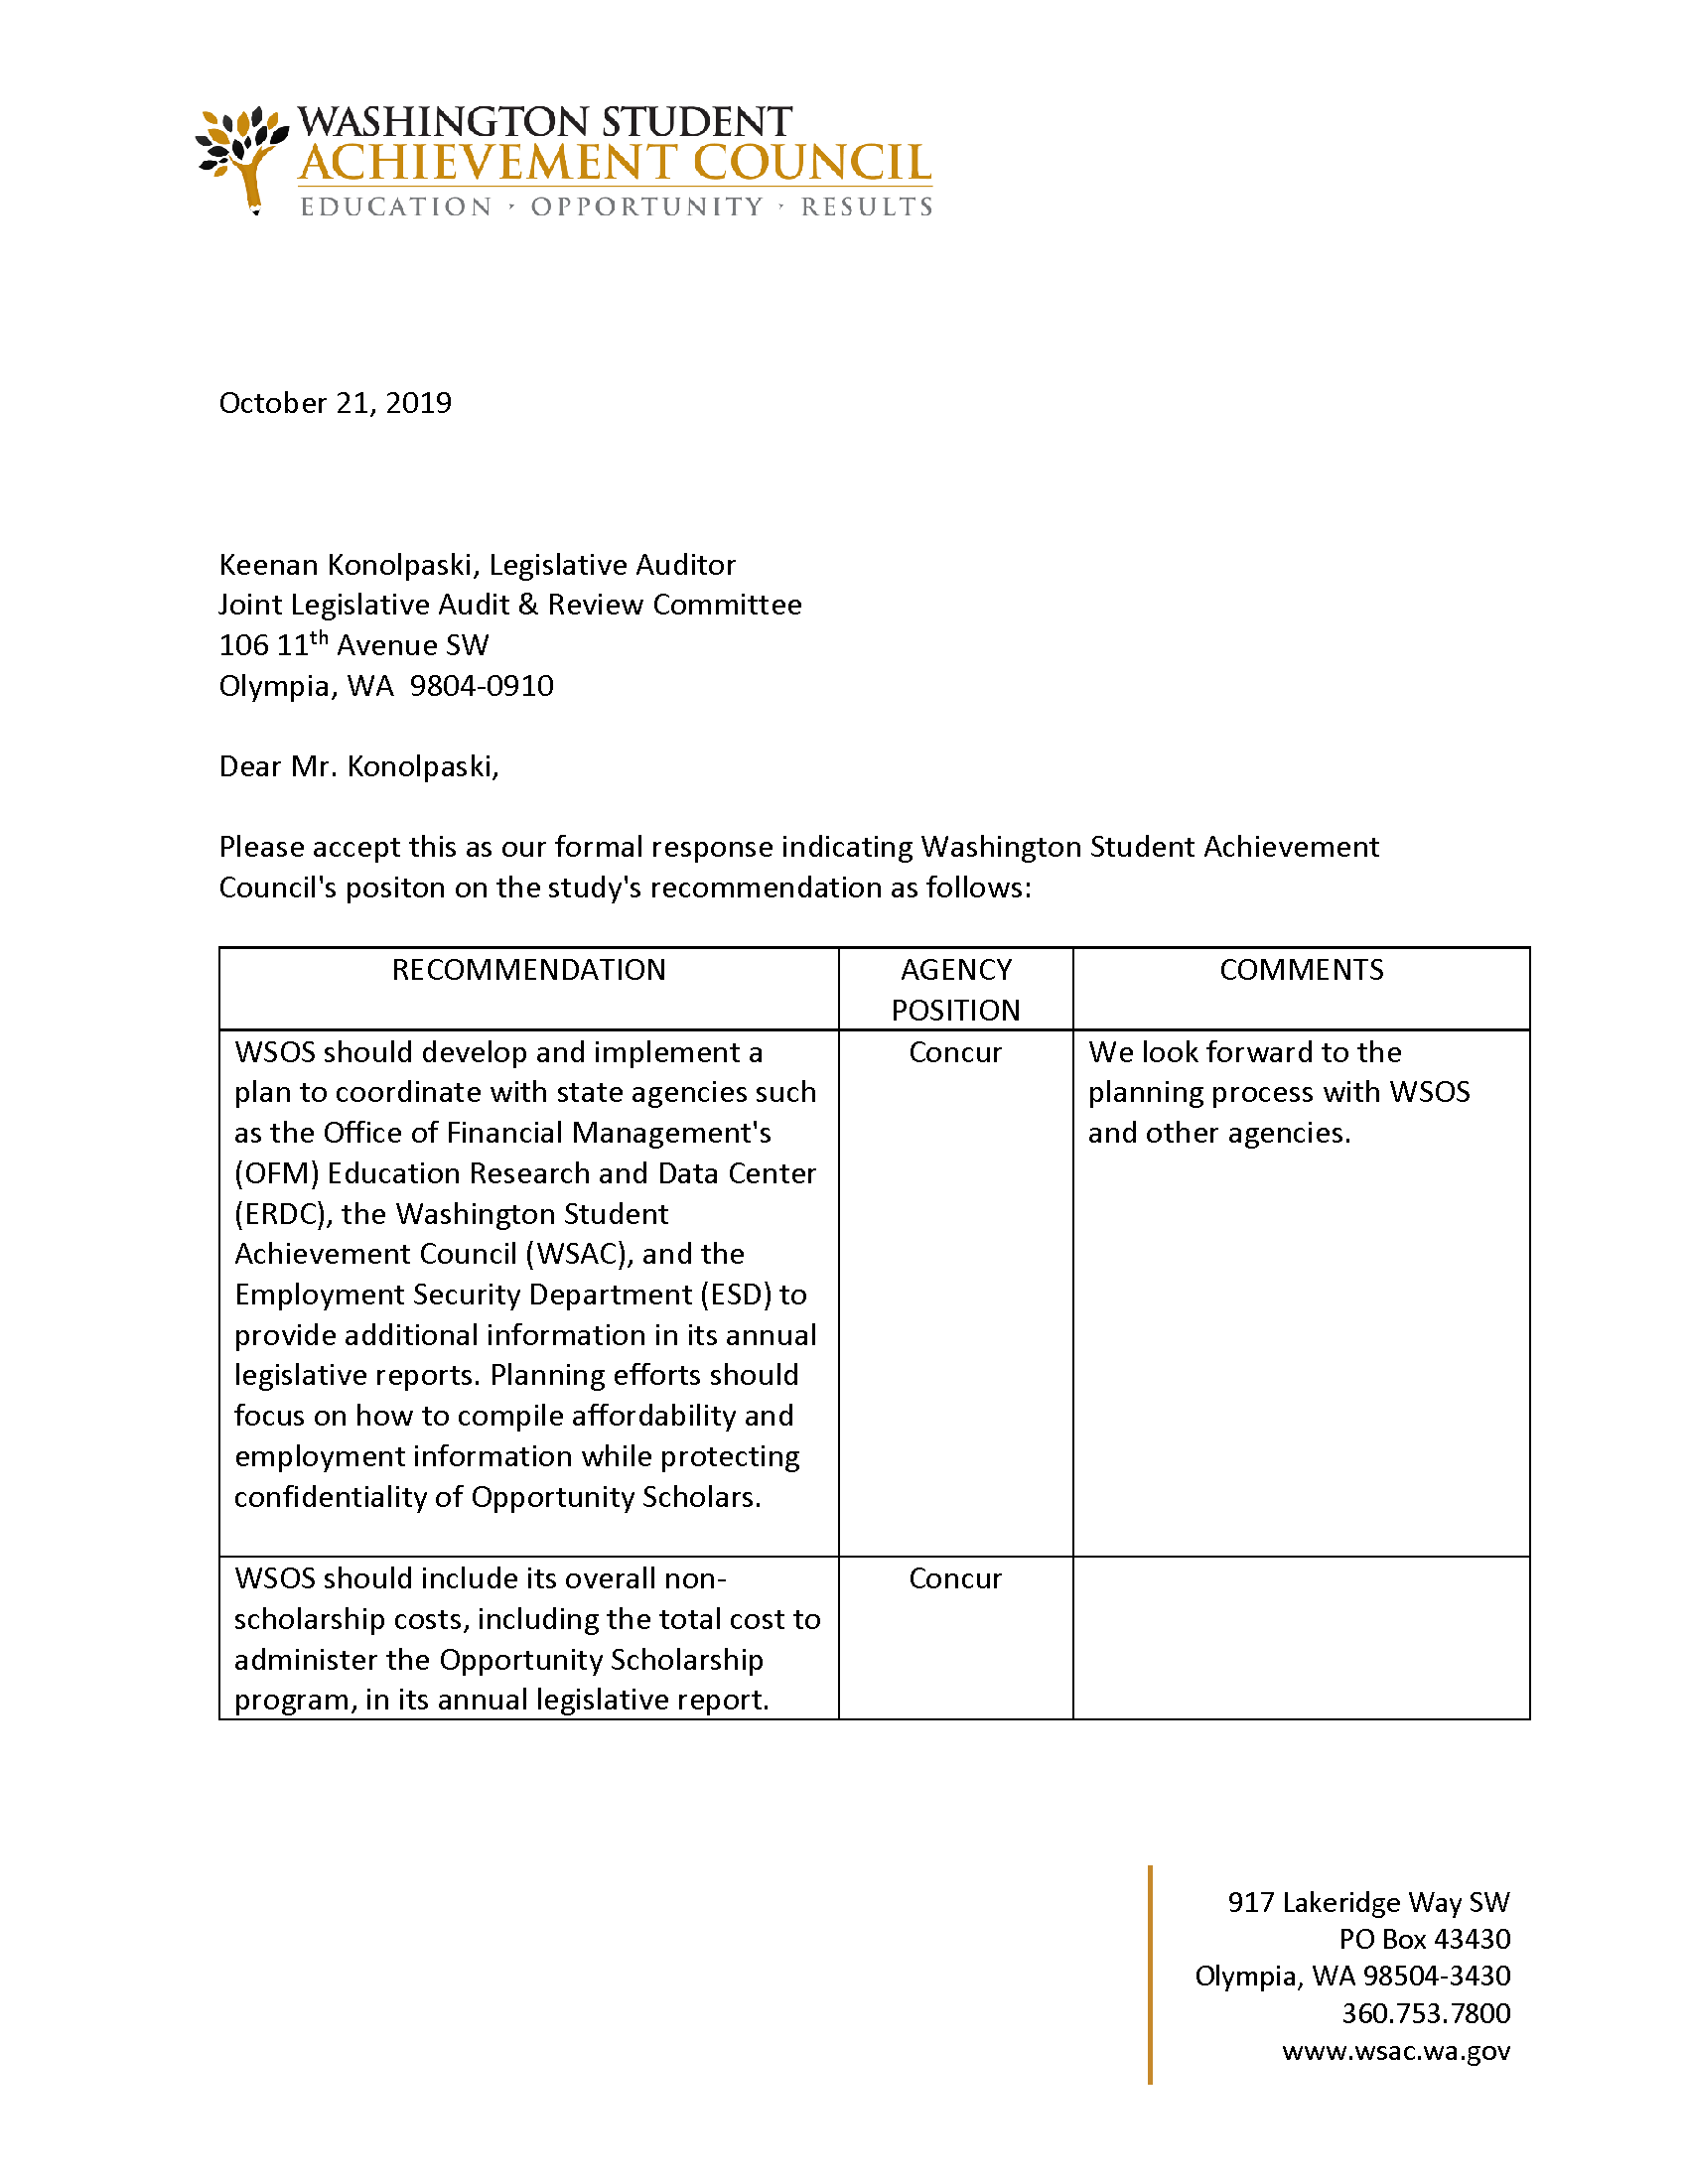 Image of WSAC's formal response concuring with recommendations (page 1)